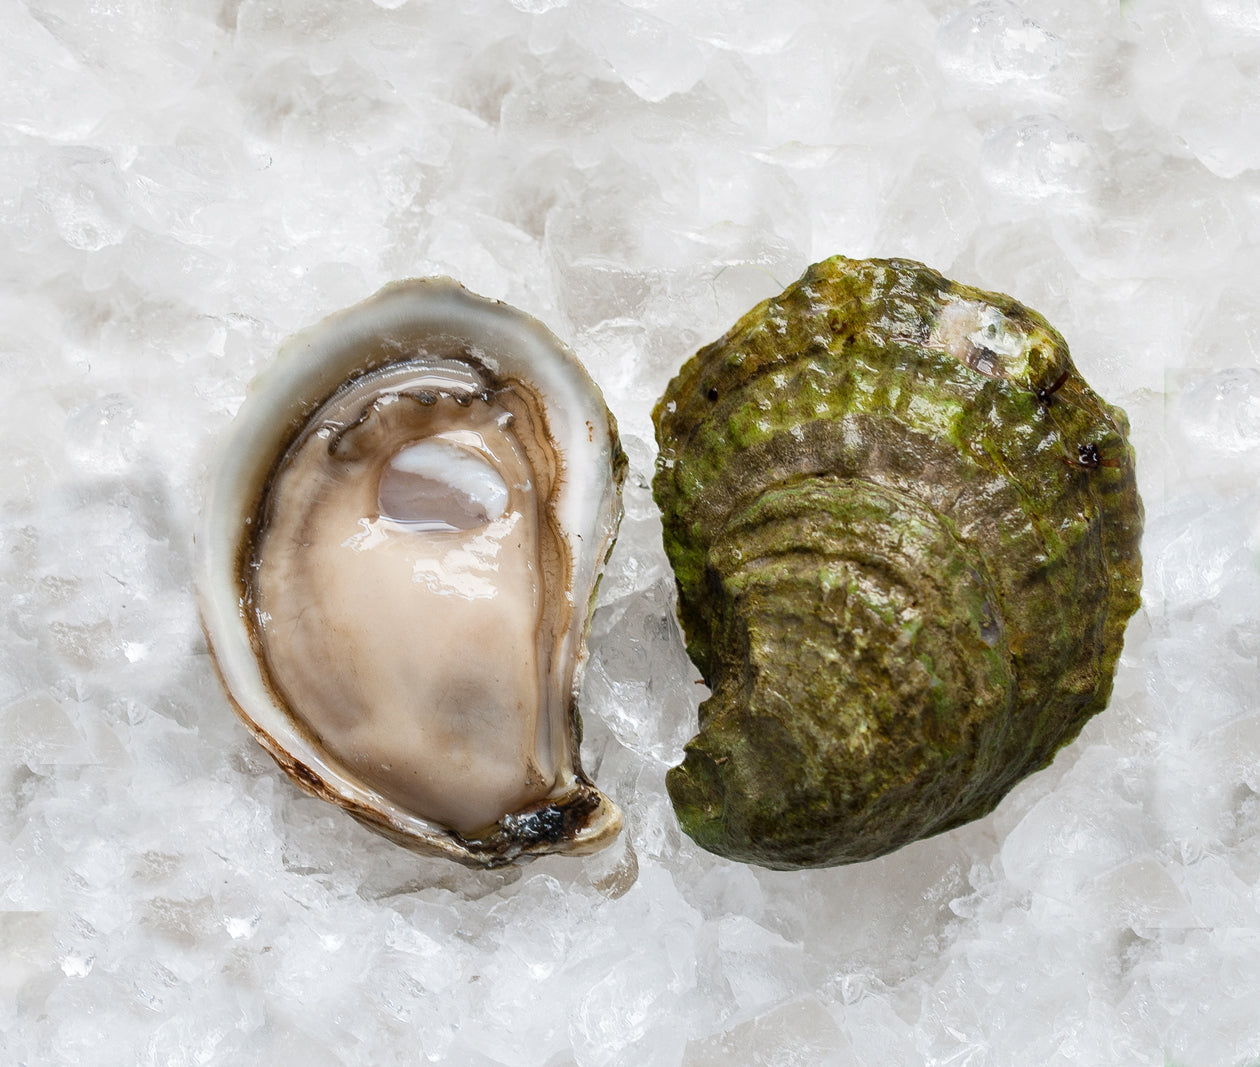 Sand Dune Oysters from Souris, PEI, CAN